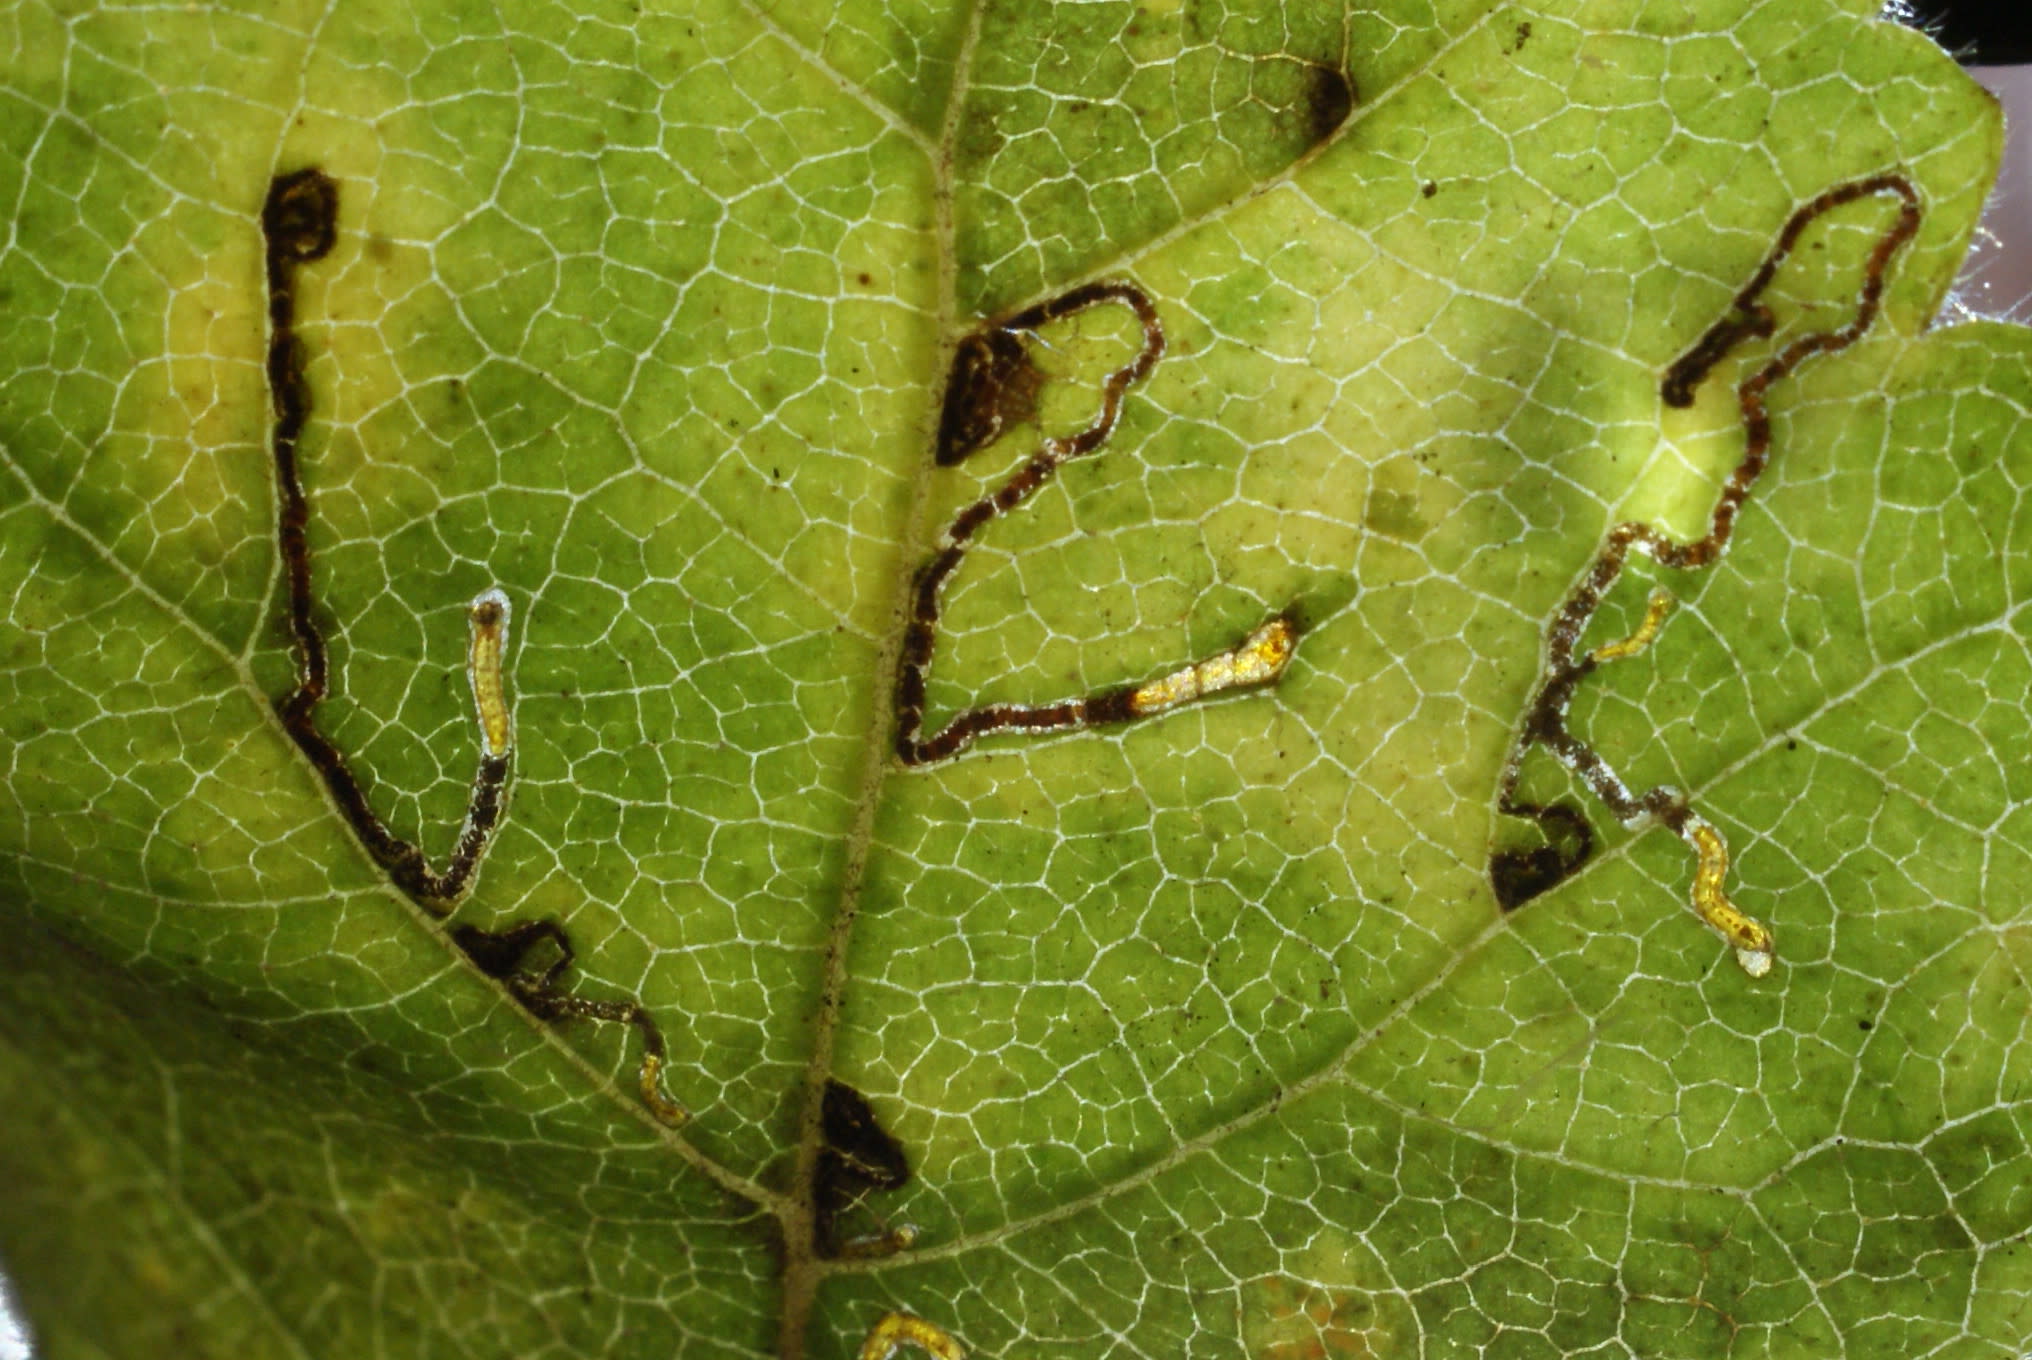 Common Birch Pigmy (Stigmella betulicola) photographed at Betteshanger Park, Sholden  by Dave Shenton